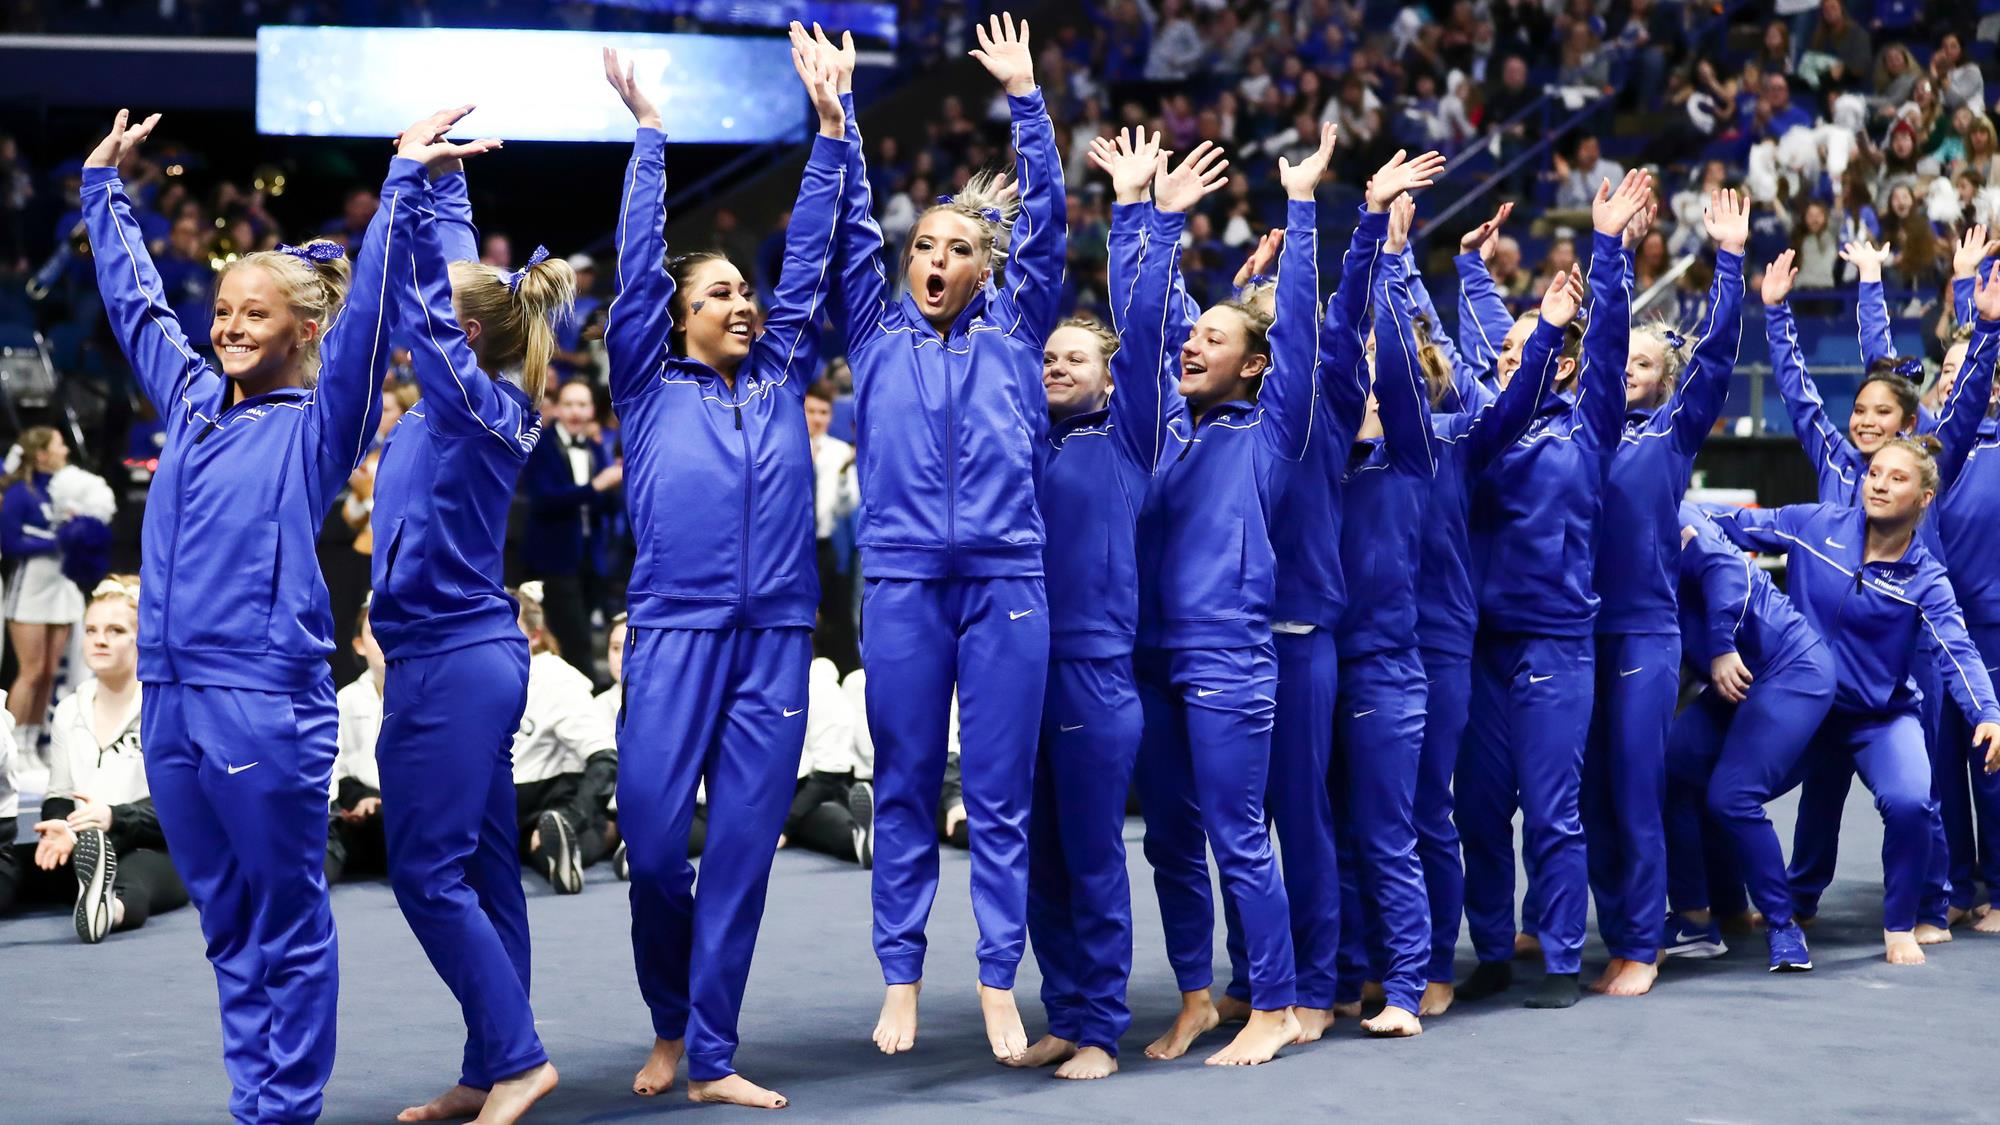 Cats Close SEC Slate with Fourth Score of 196.650 or Better